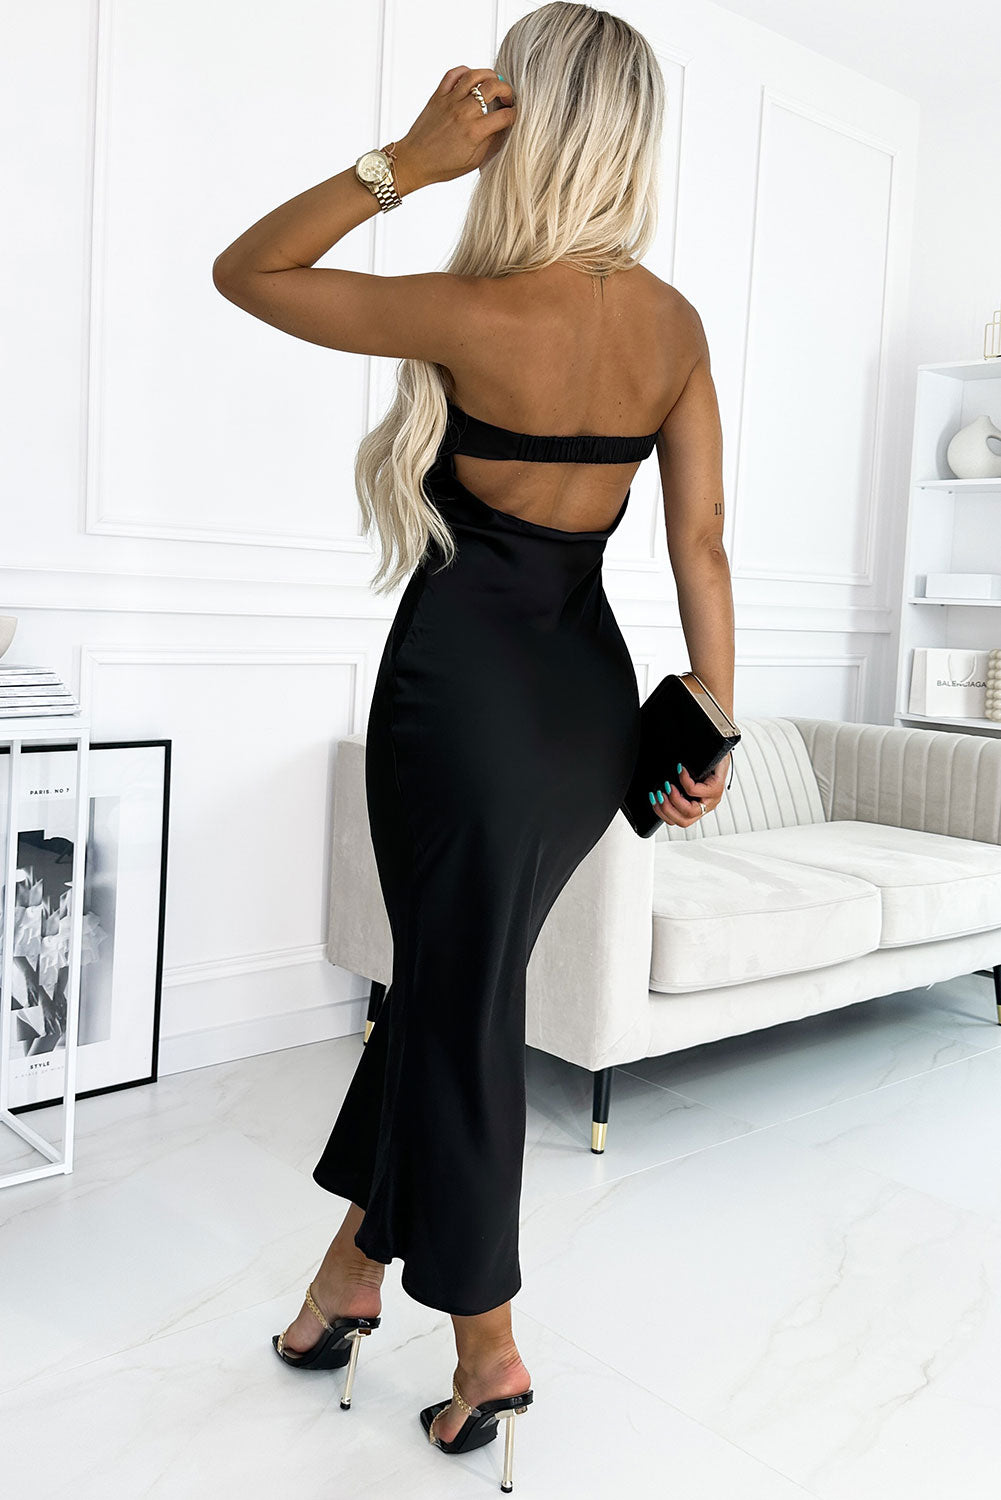 Elegant Black Tie Summer Wedding Guest Dress: Strapless Cutout Bodycon for Formal Events